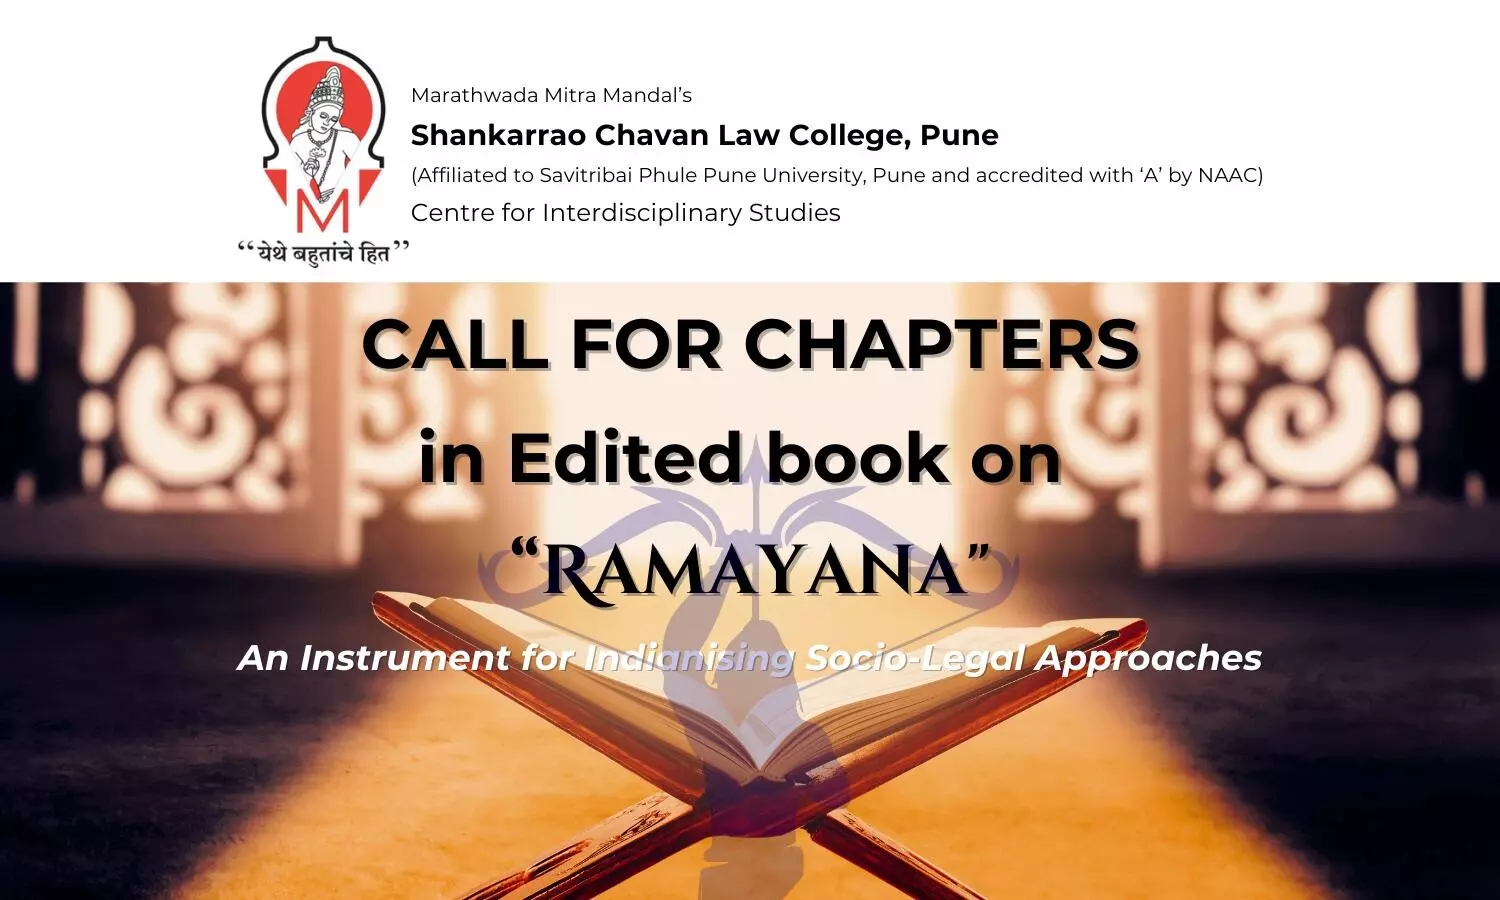 Call for Chapters for an Edited Book on Ramayana: An Instrument for Indianising Socio-Legal Approaches | Shankarrao Chavan Law College, Pune